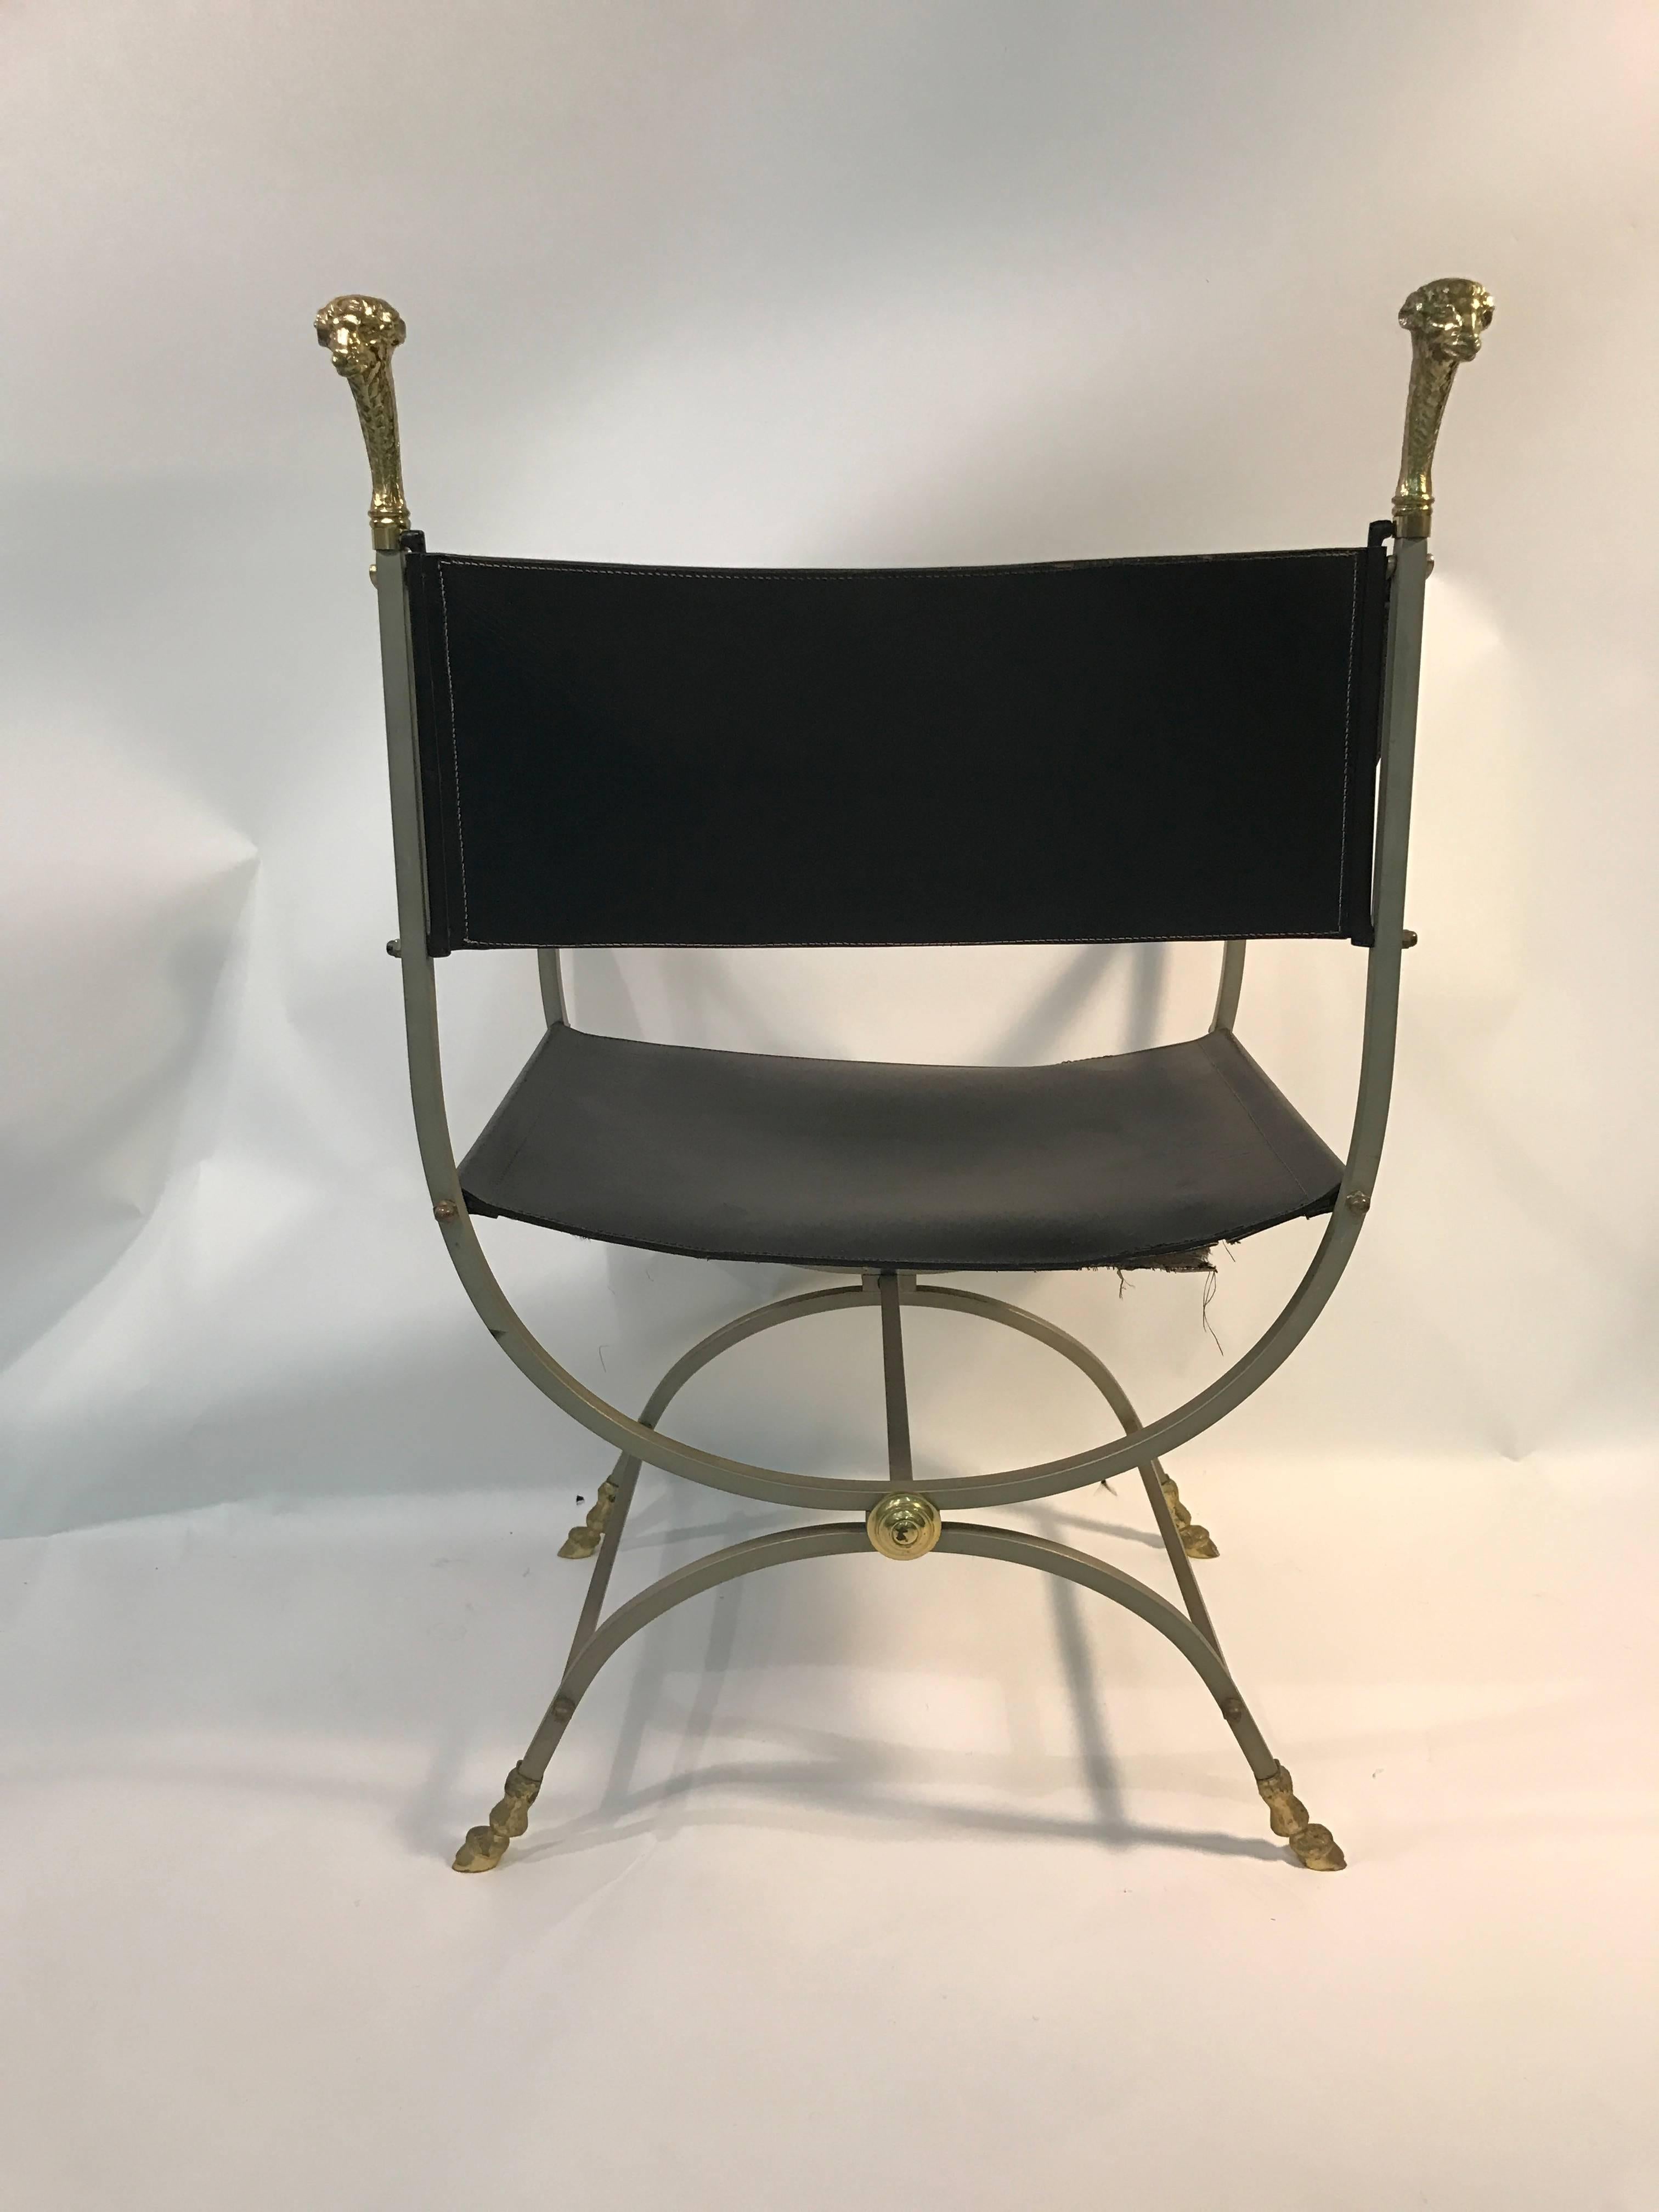 Striking Steel and Brass Black Leather Chair with Ram's Head Design by Jansen For Sale 1